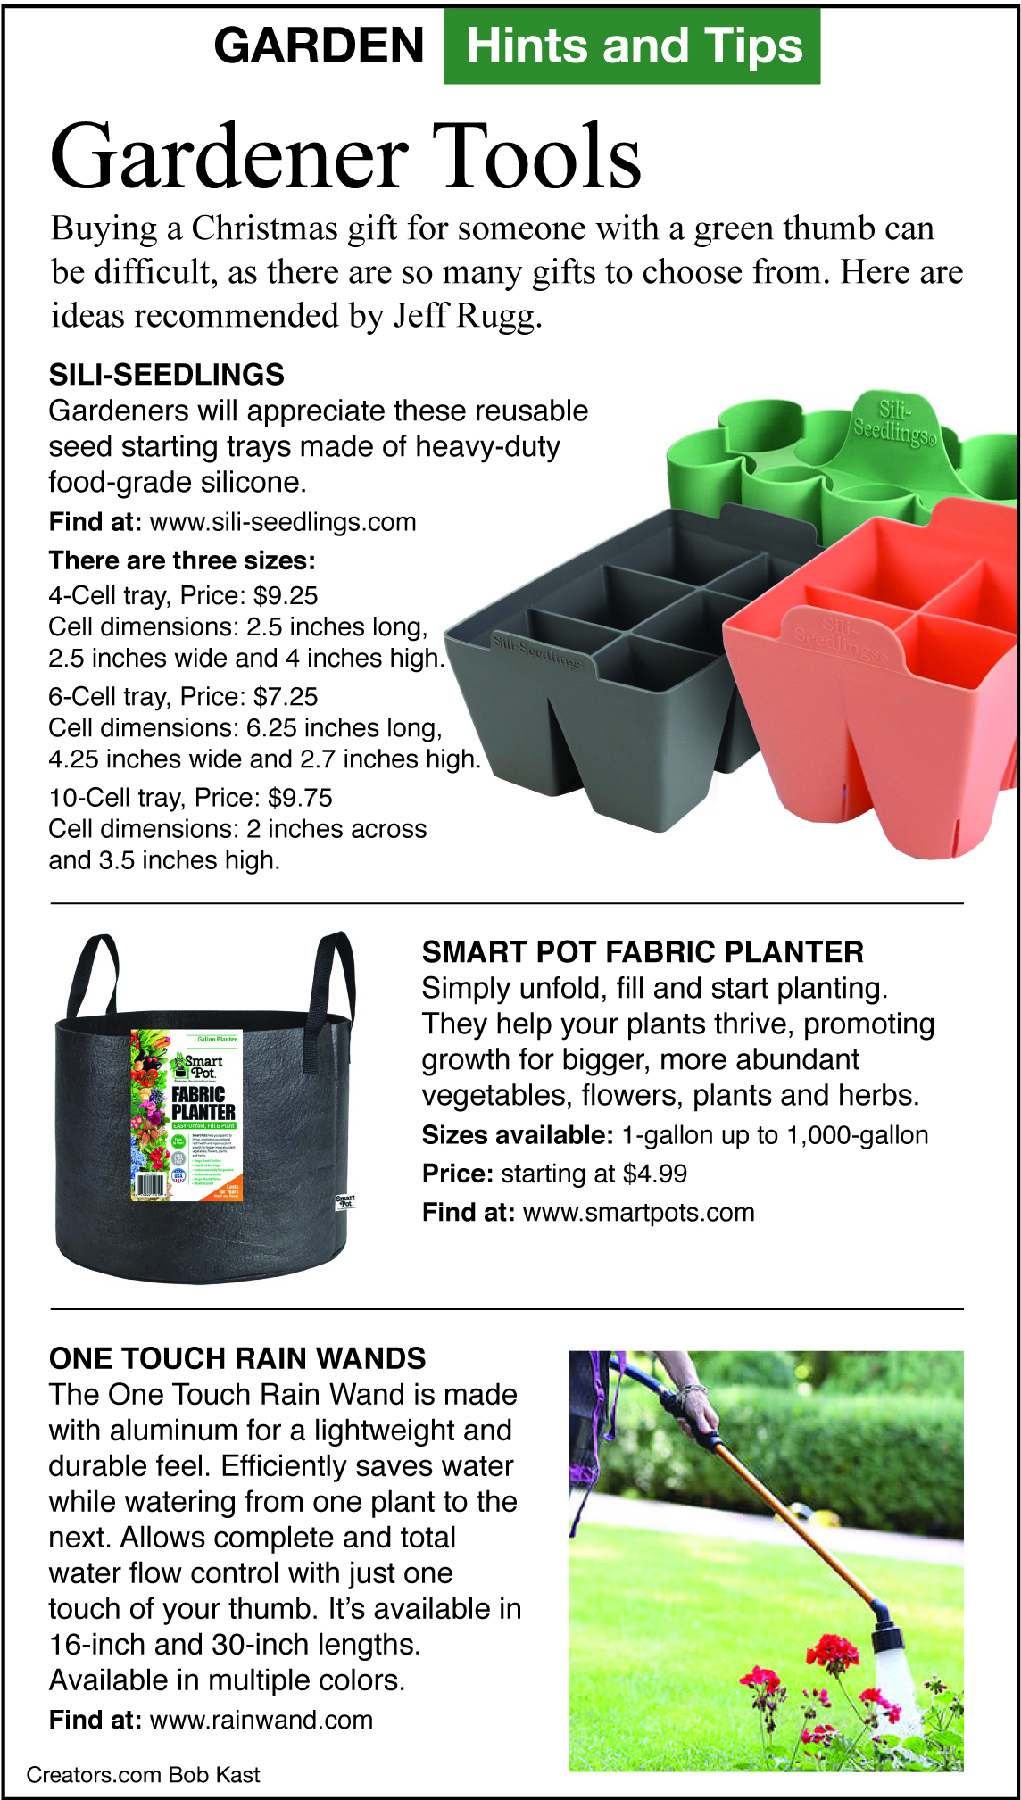 Sili-Seedlings Silicone Seed Starting Trays